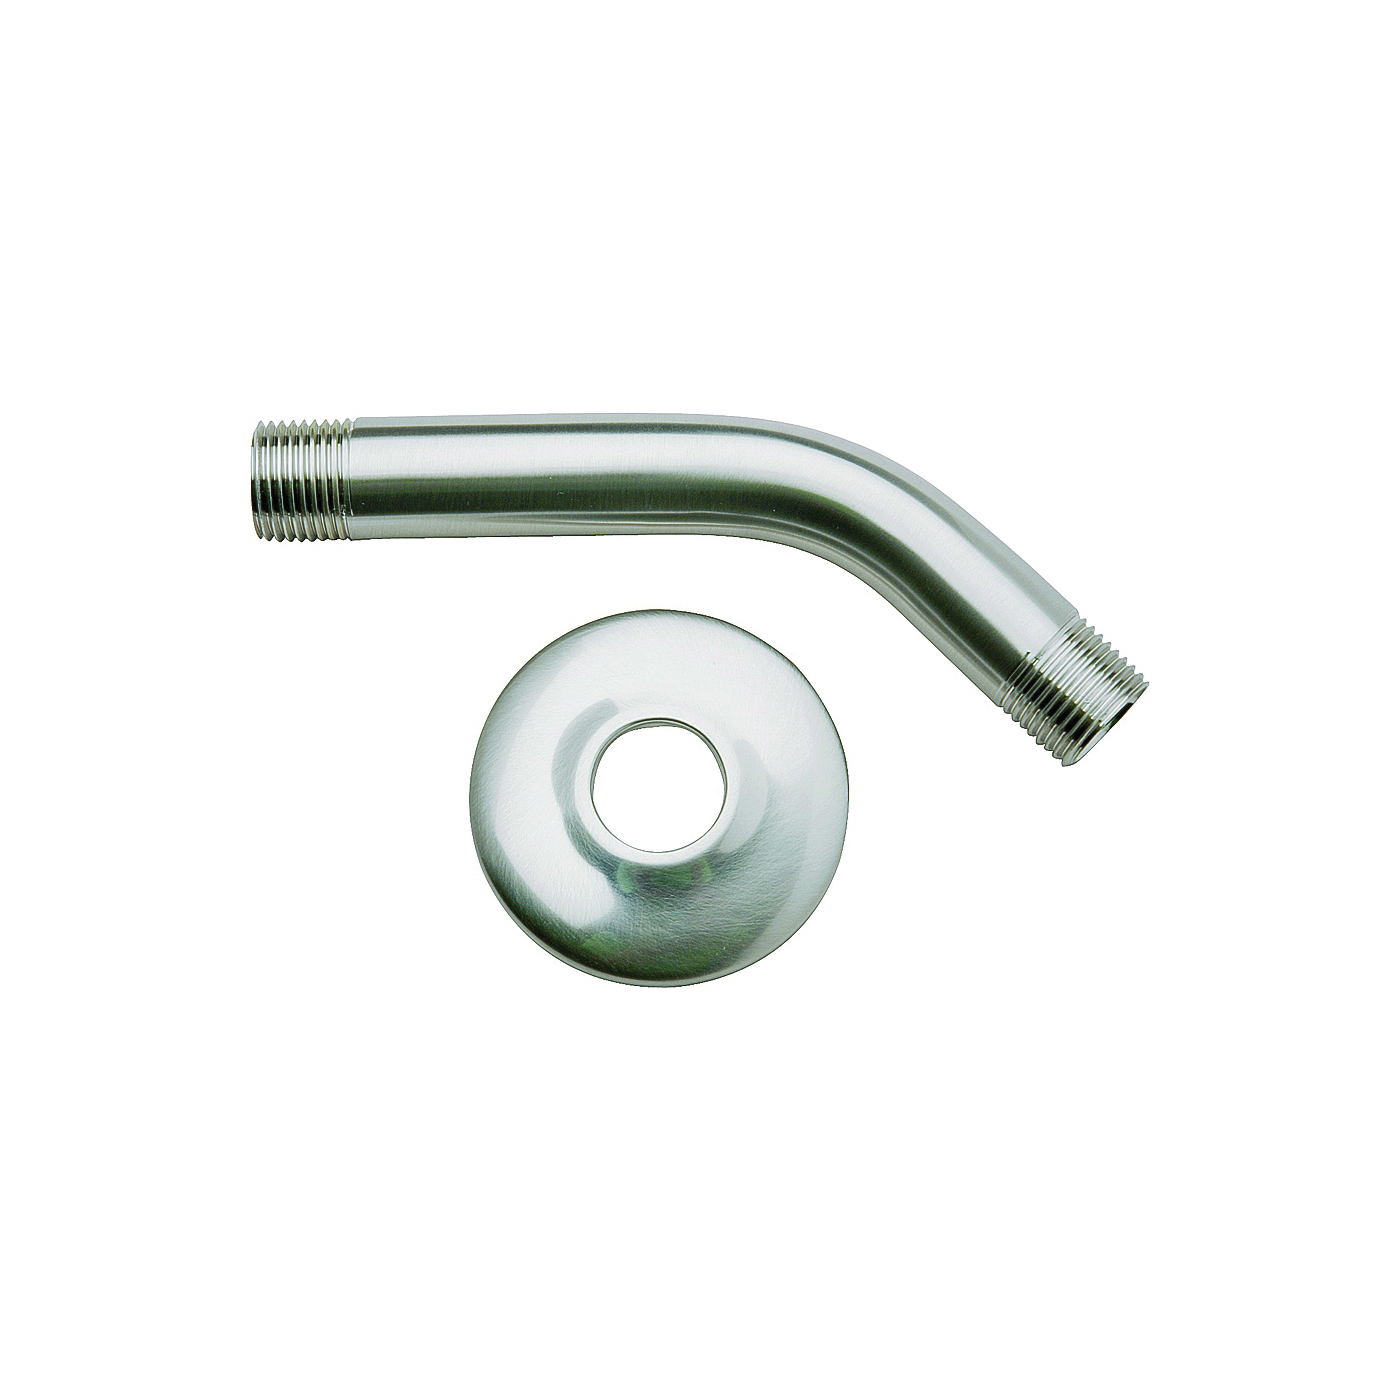 PP825-10 Shower Arm with Flange, 1/2 in Connection, IPS, 6 in L, Brass, Chrome Plated